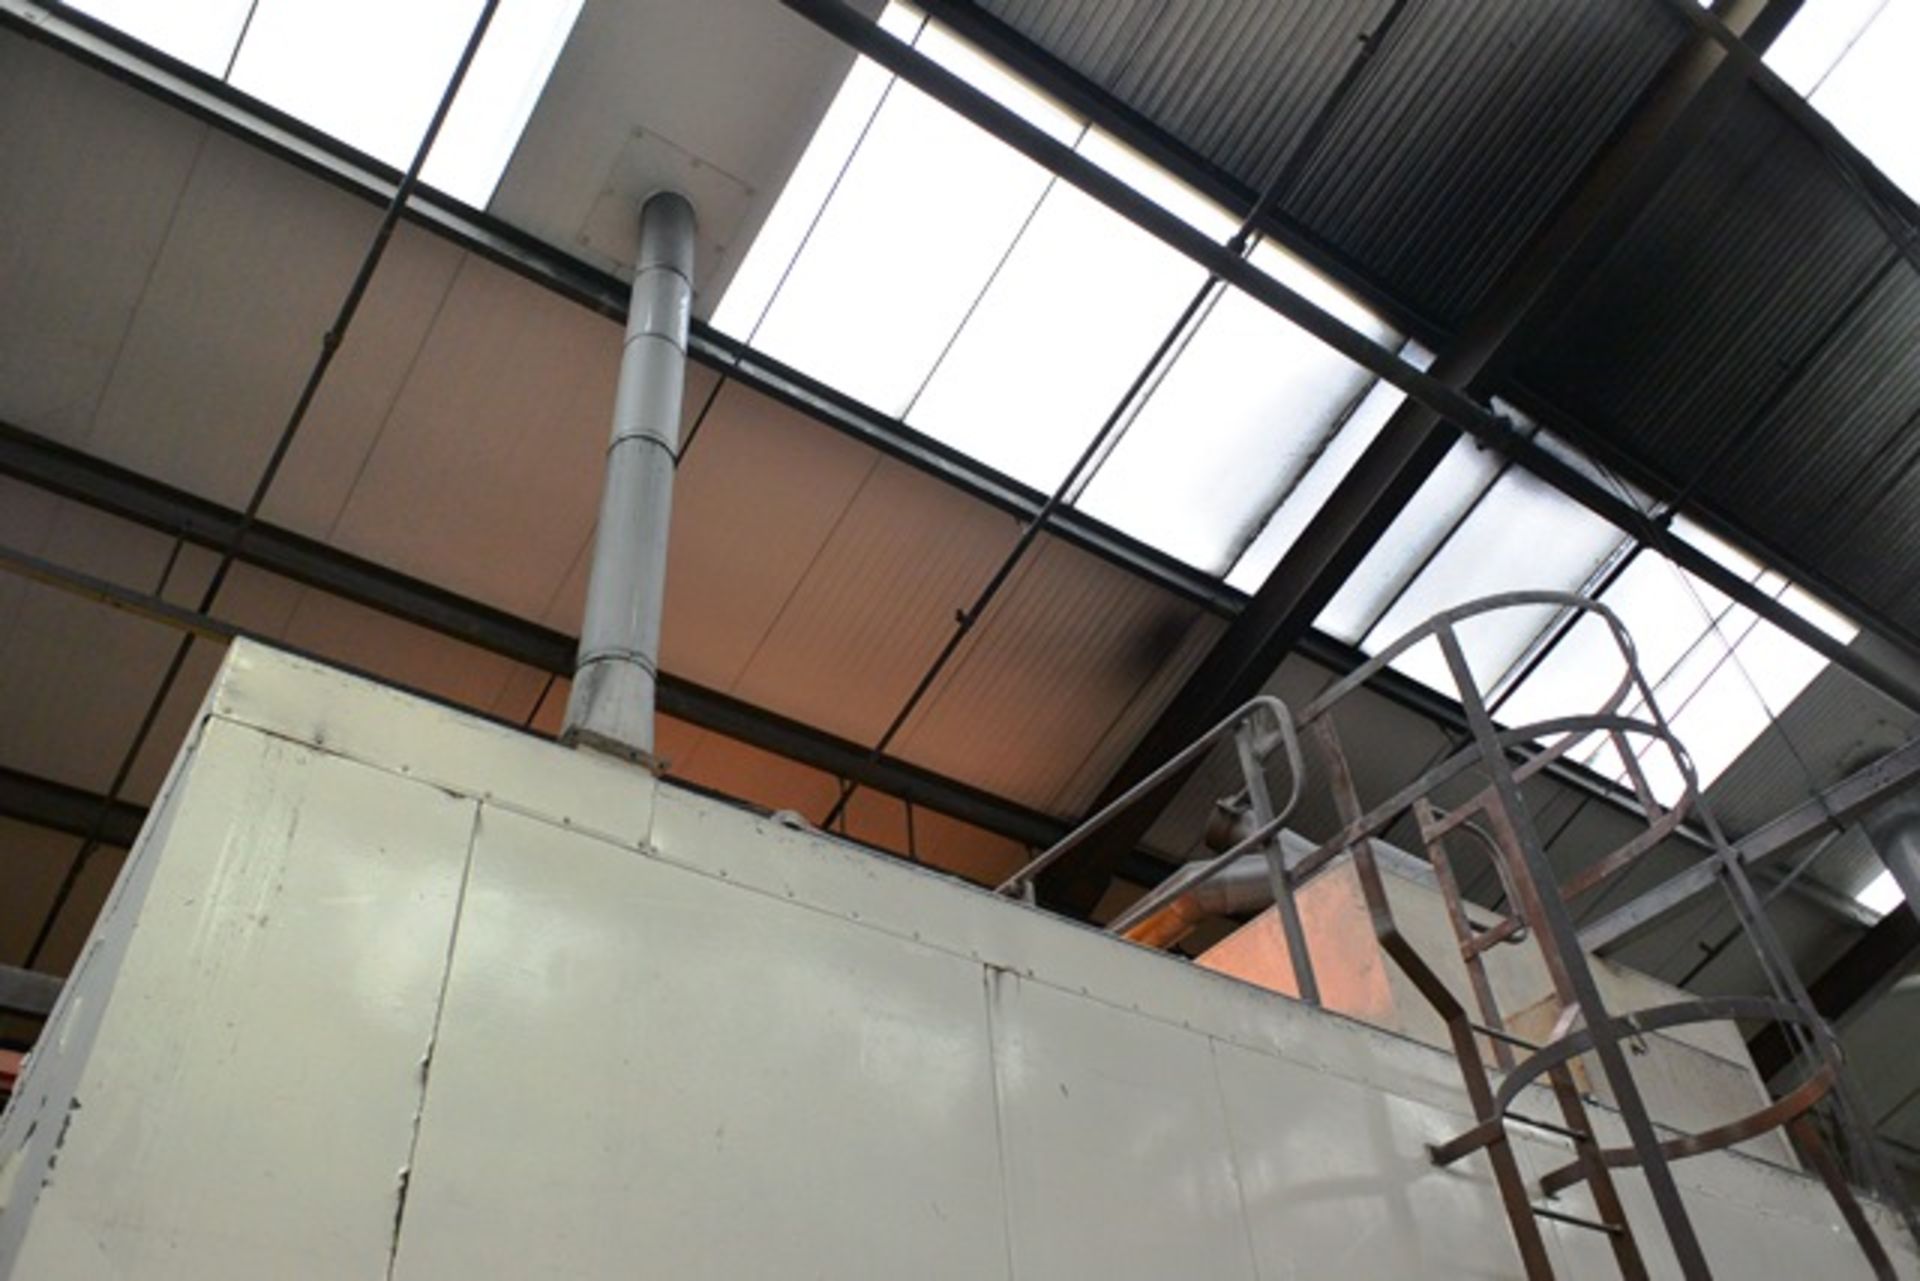 Thorid throughfeed 2-pass curing oven, approx dimensions 10 x 3m, with roof mounted fans and... - Image 2 of 8